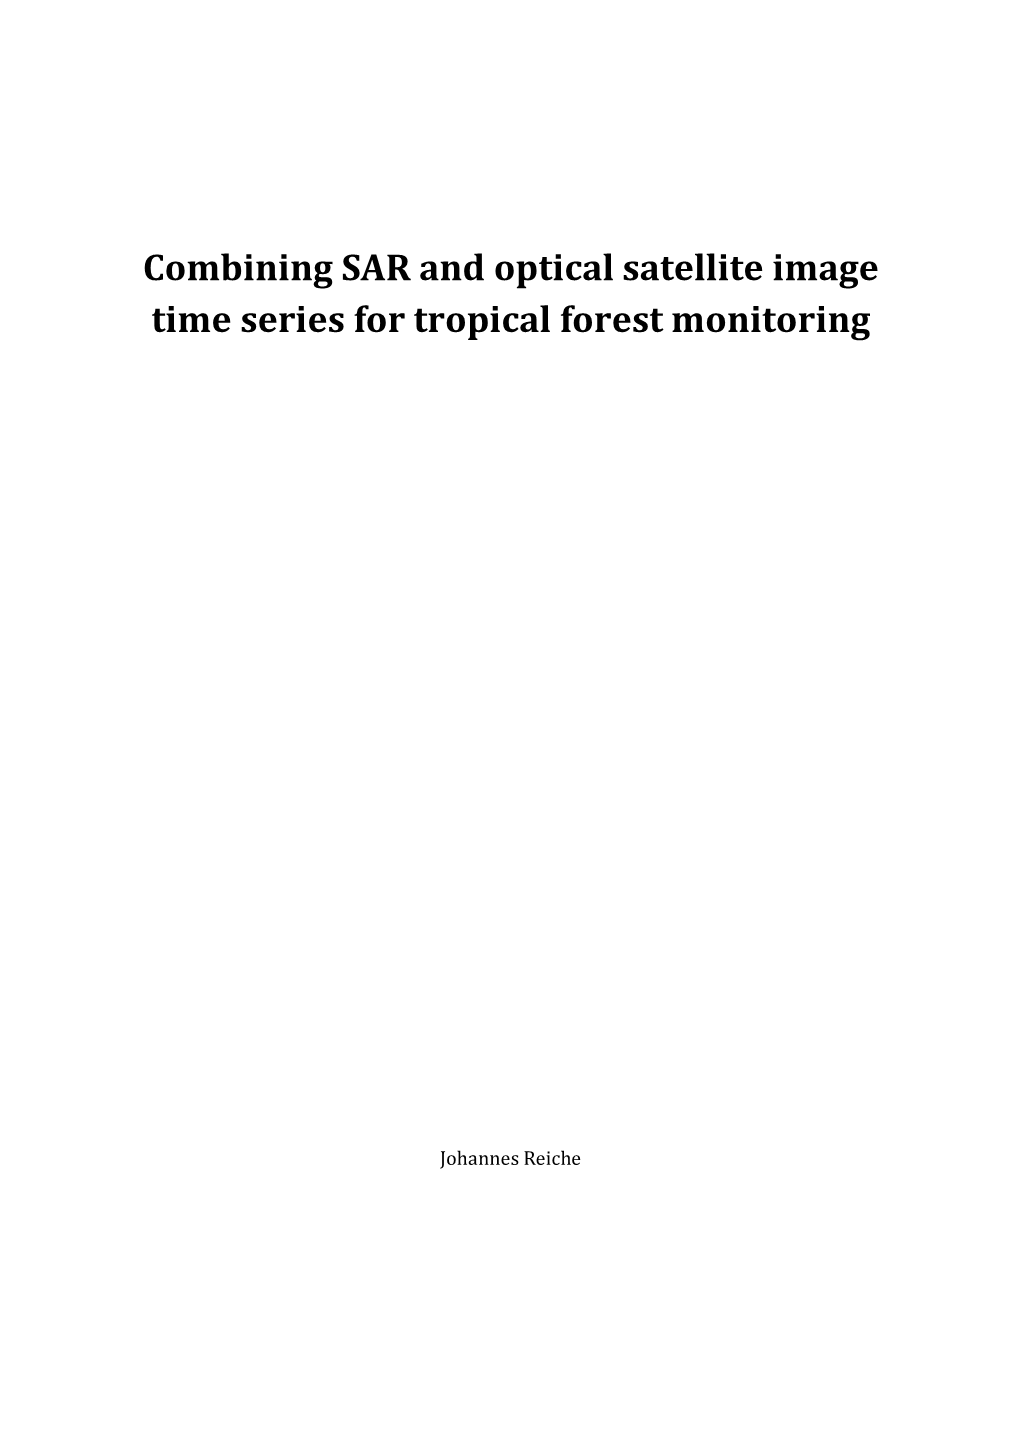 Combining SAR and Optical Satellite Image Time Series for Tropical Forest Monitoring